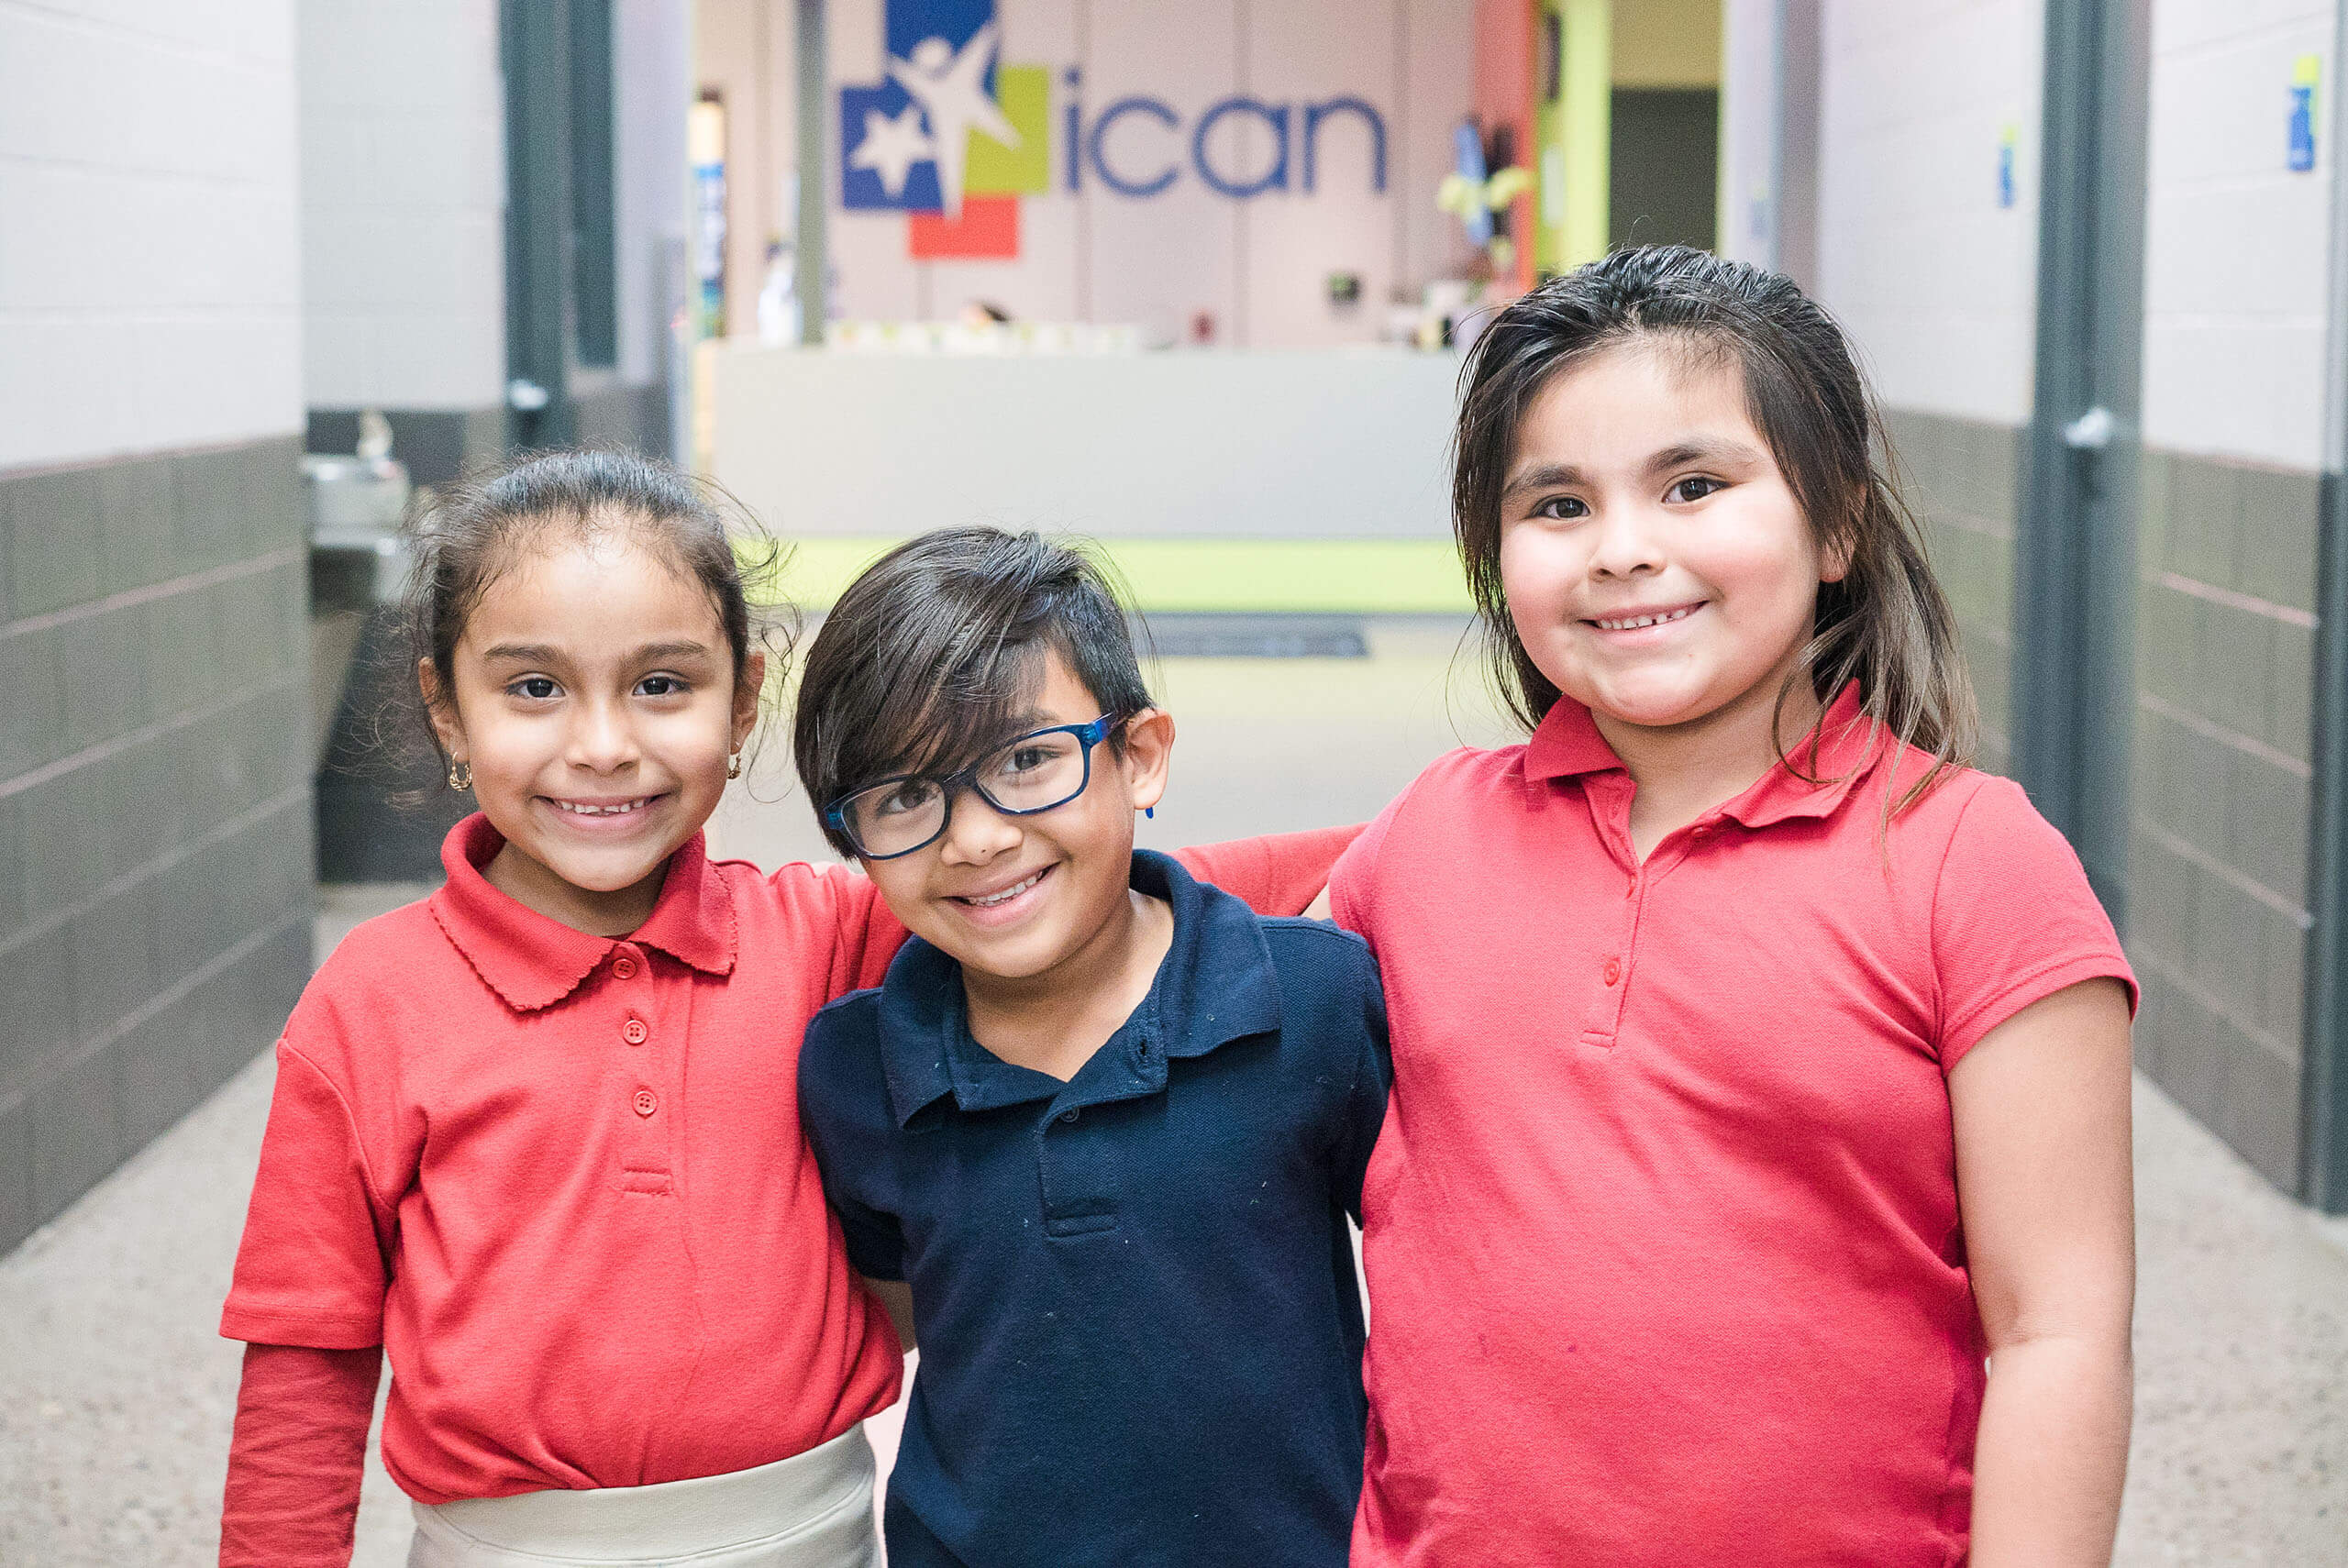 Three young kids standing smiling in the ICAN building